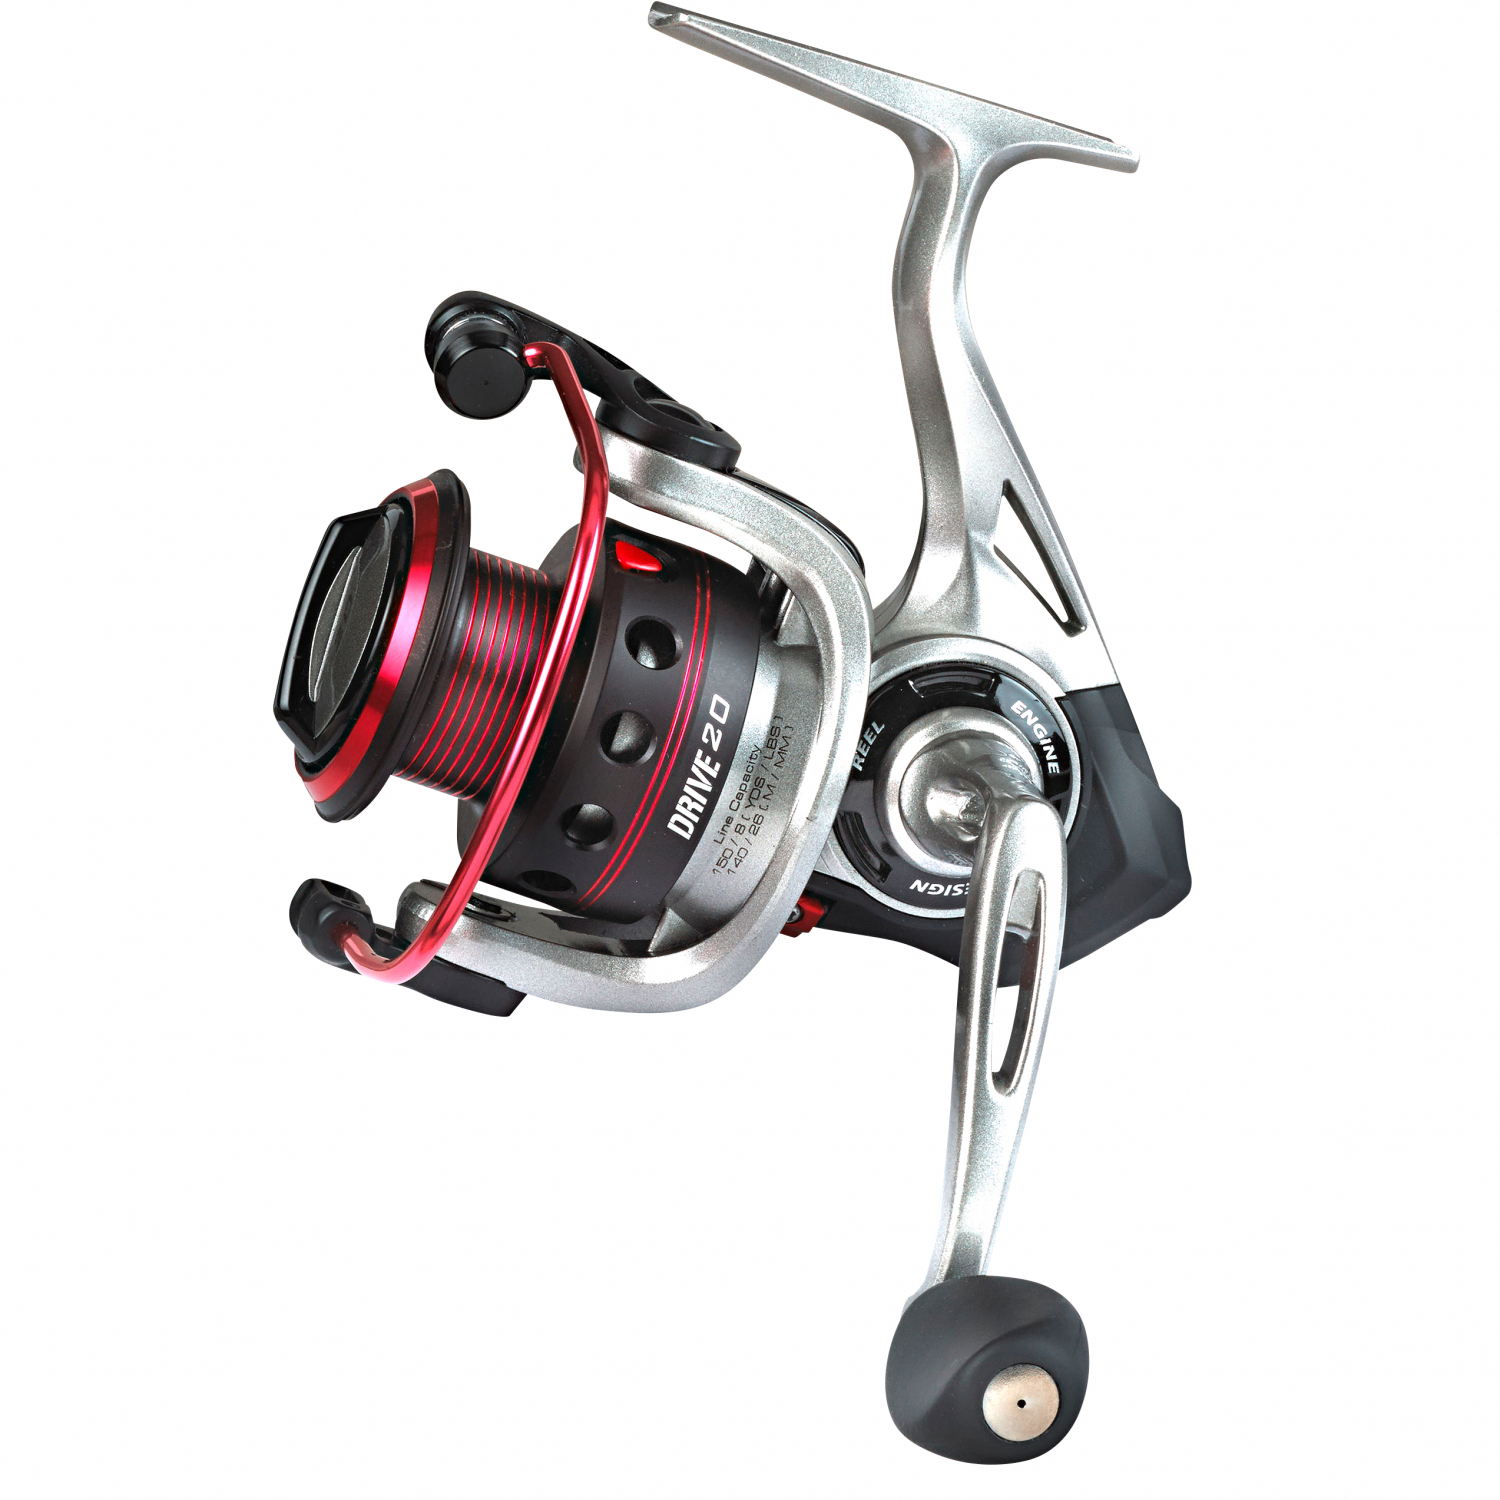 Quantum Fishing Reel Drive Spin at low prices